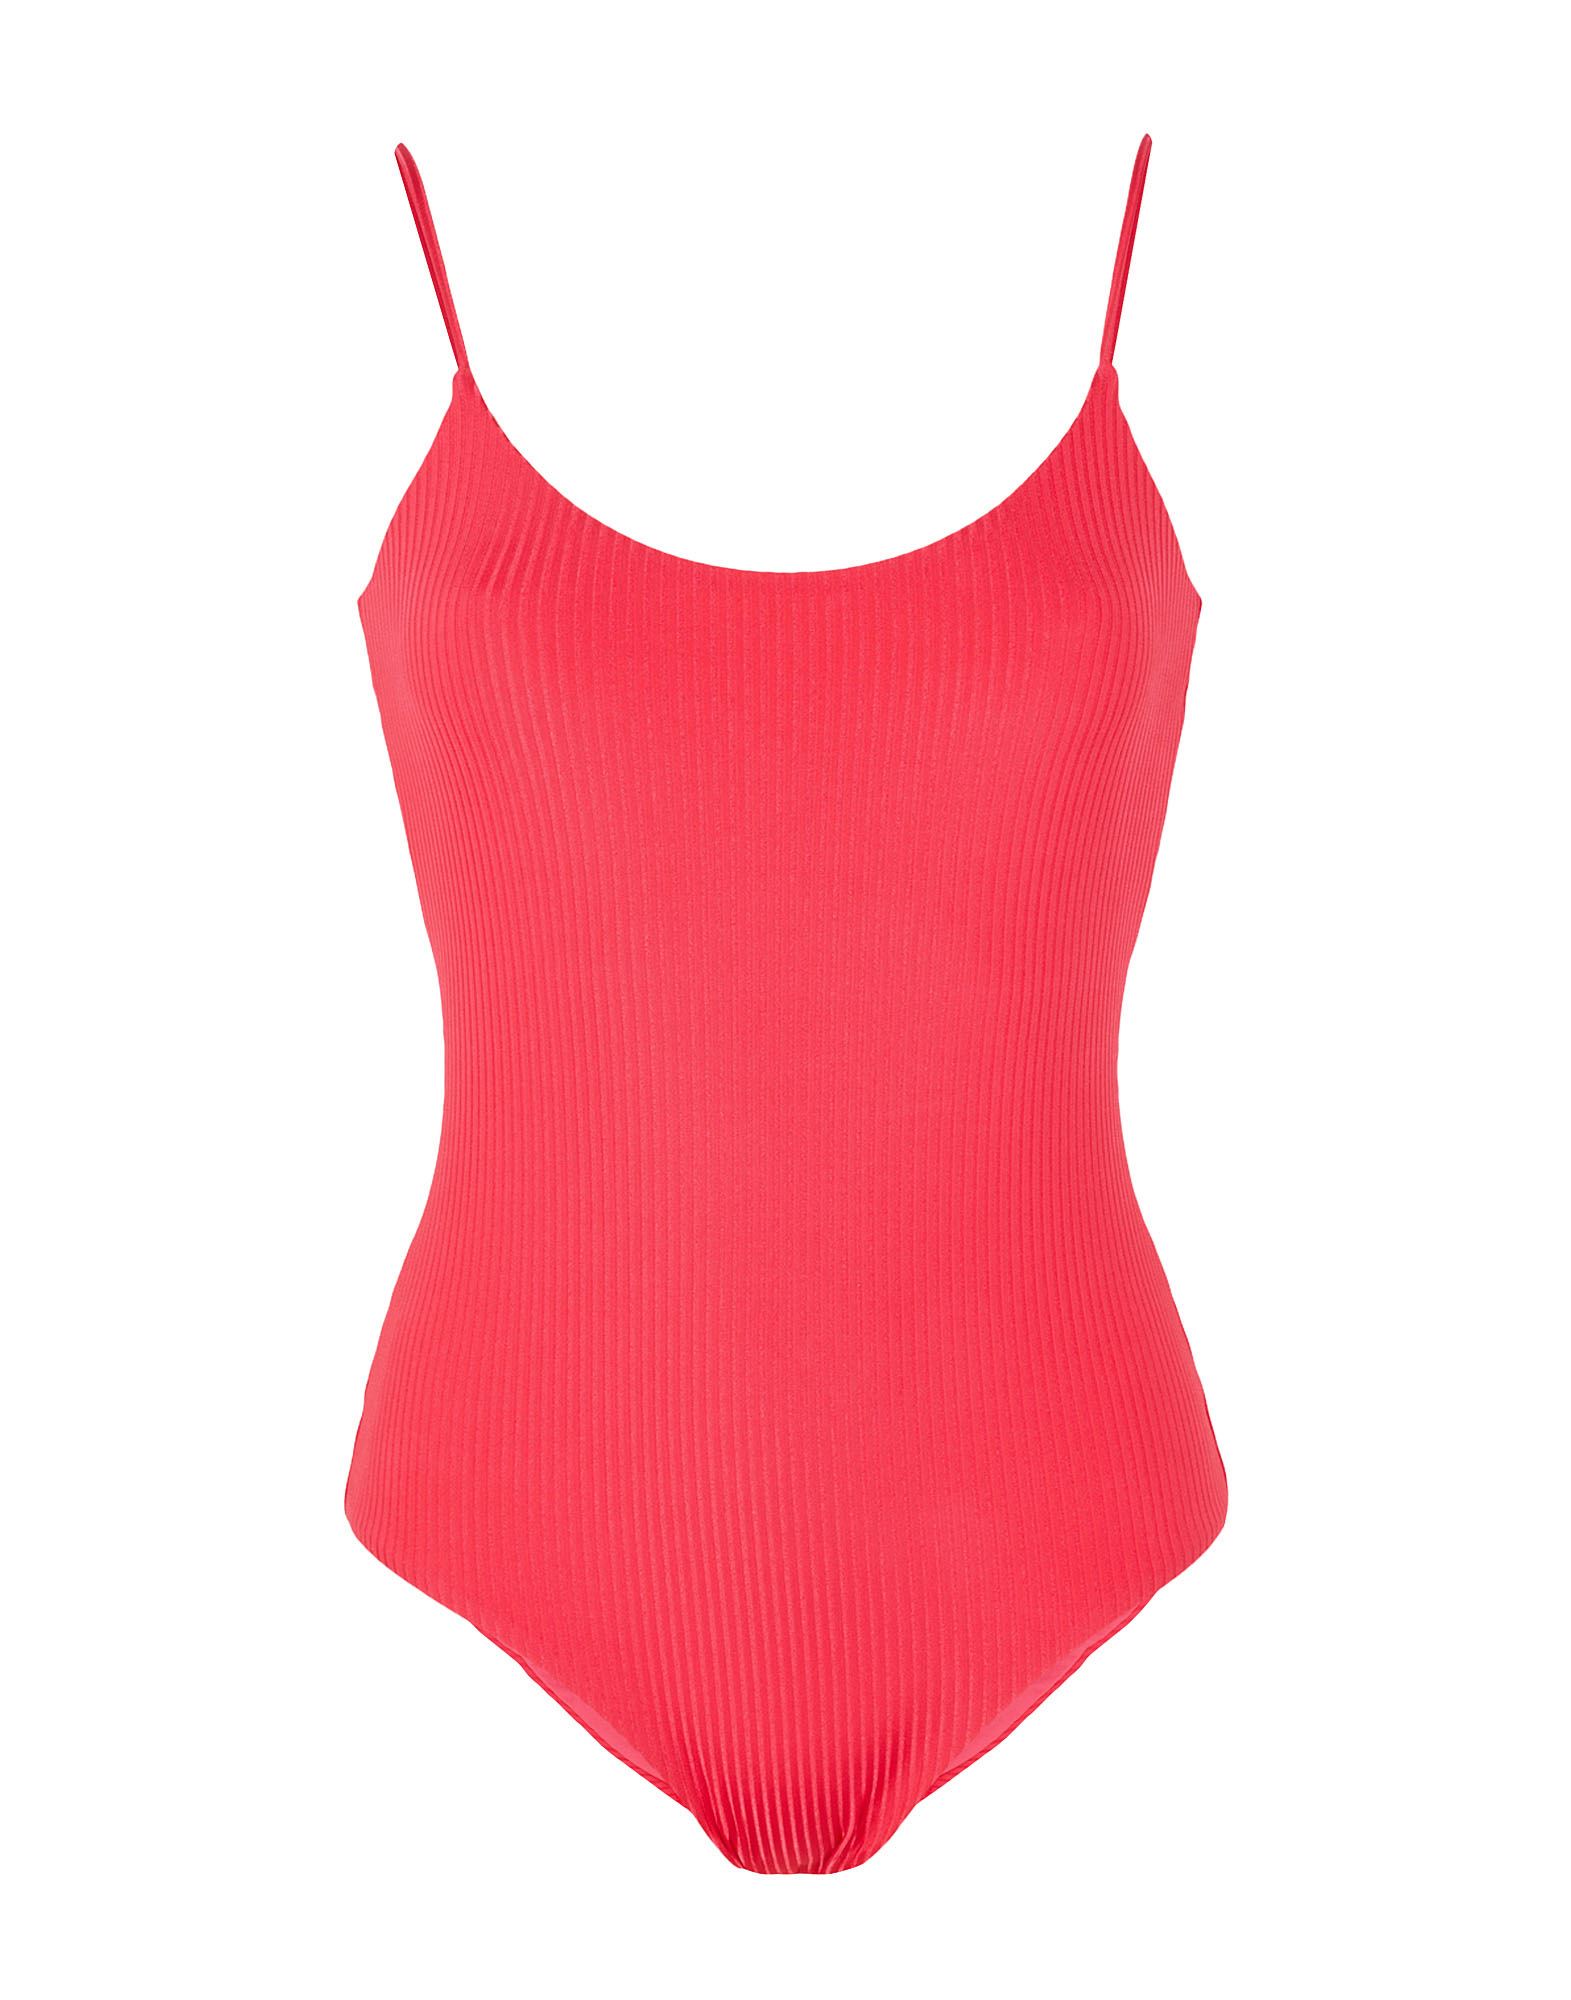 8 by YOOX fB[X is[Xj RECYCLED POLY ONE-PIECE SWIMSUIT t[V